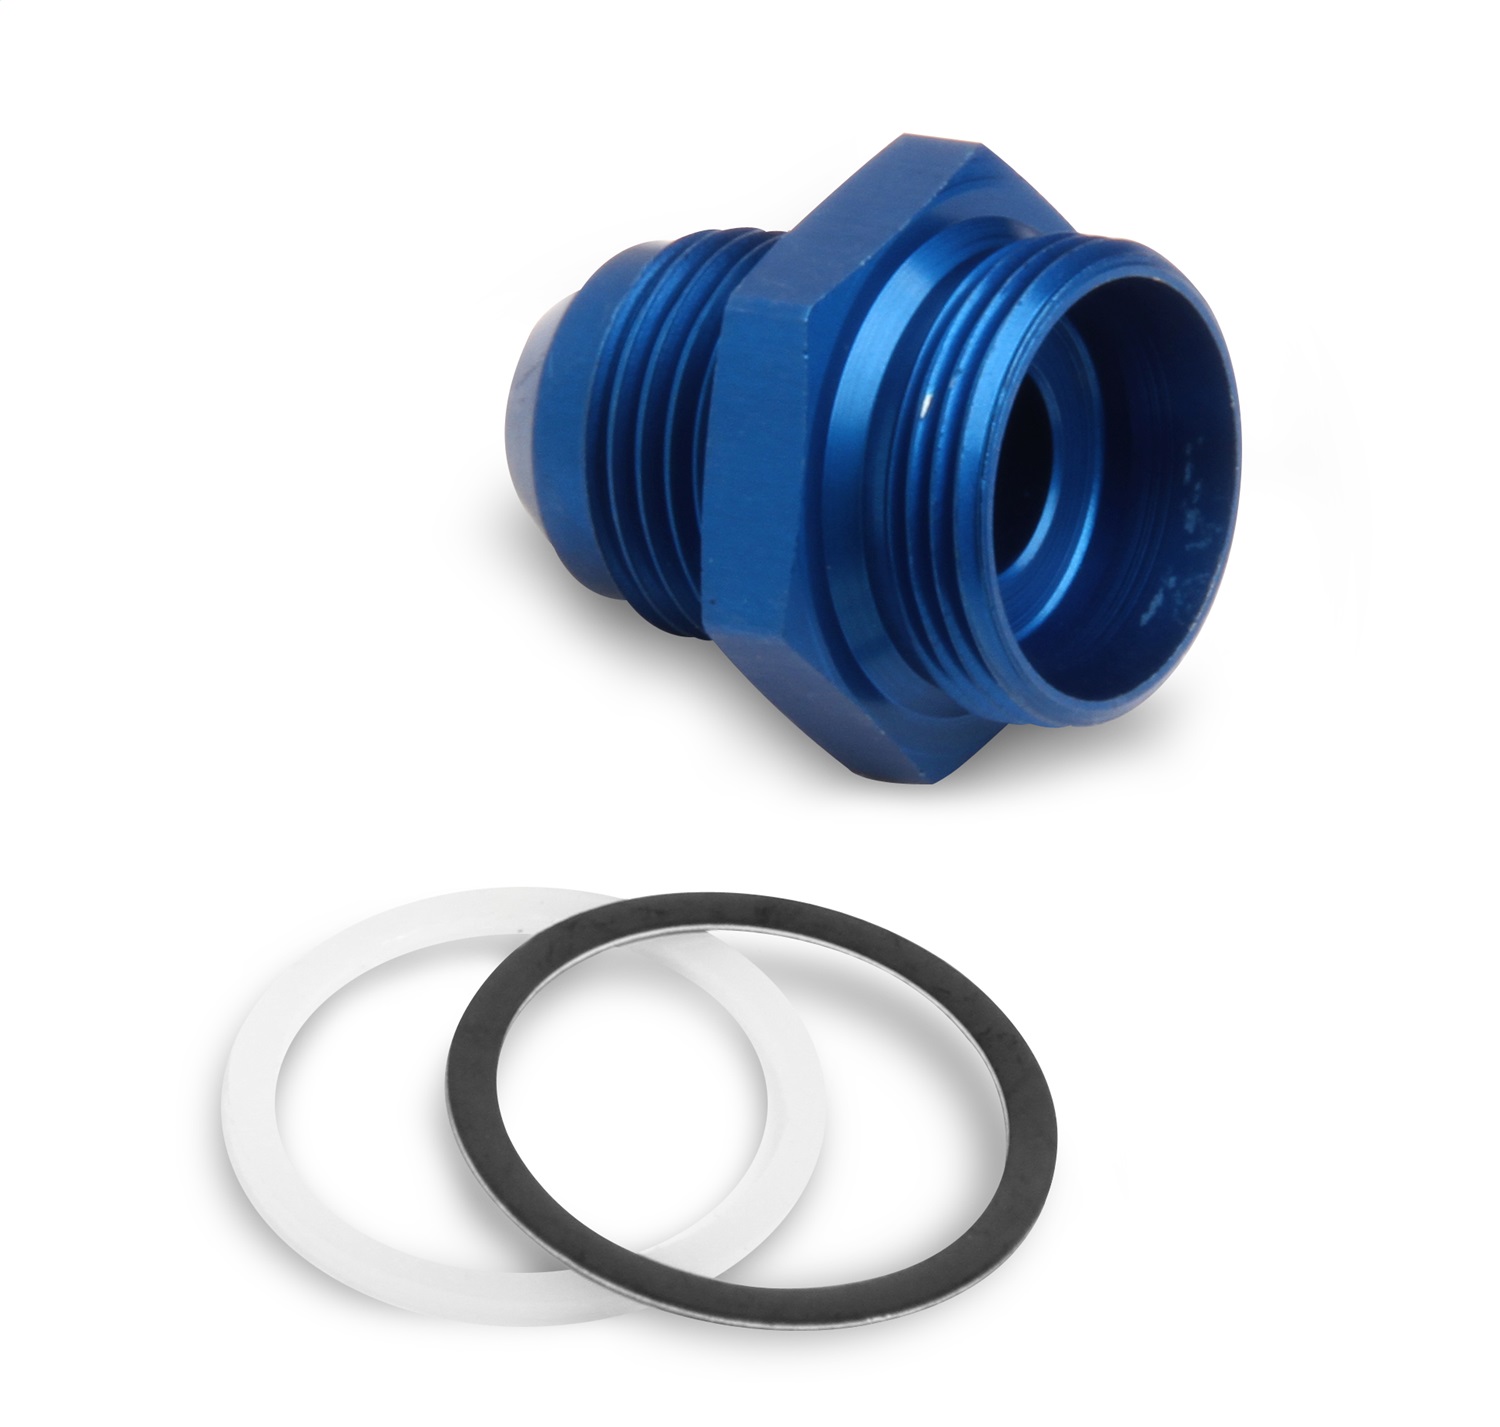 Holley Performance Holley Performance 26-74 Fuel Inlet Fitting